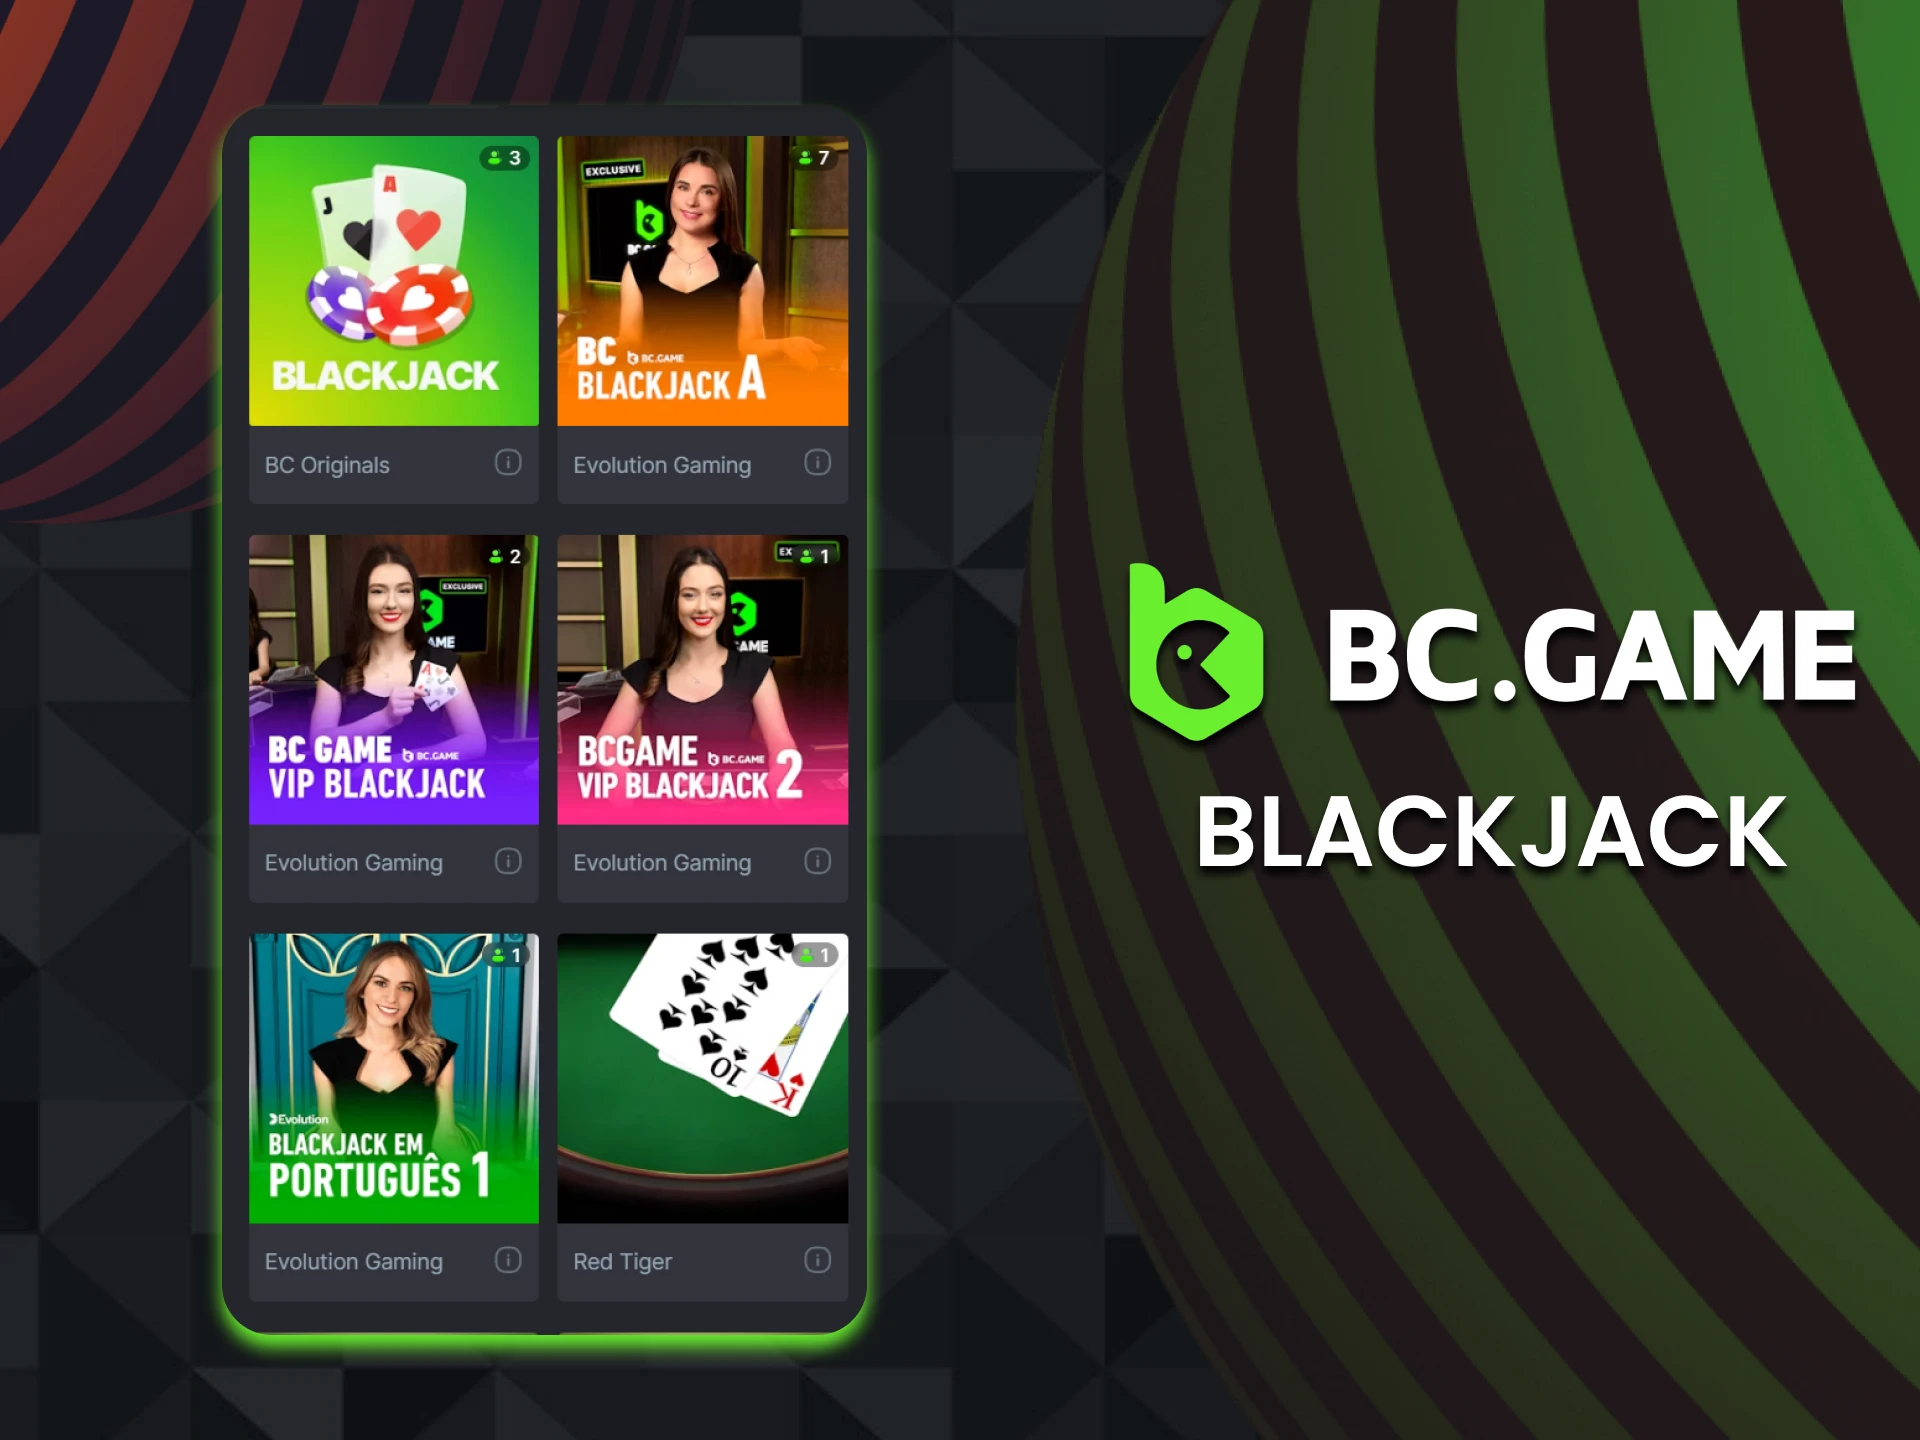 Go to the blackjack section at BC Game Casino.